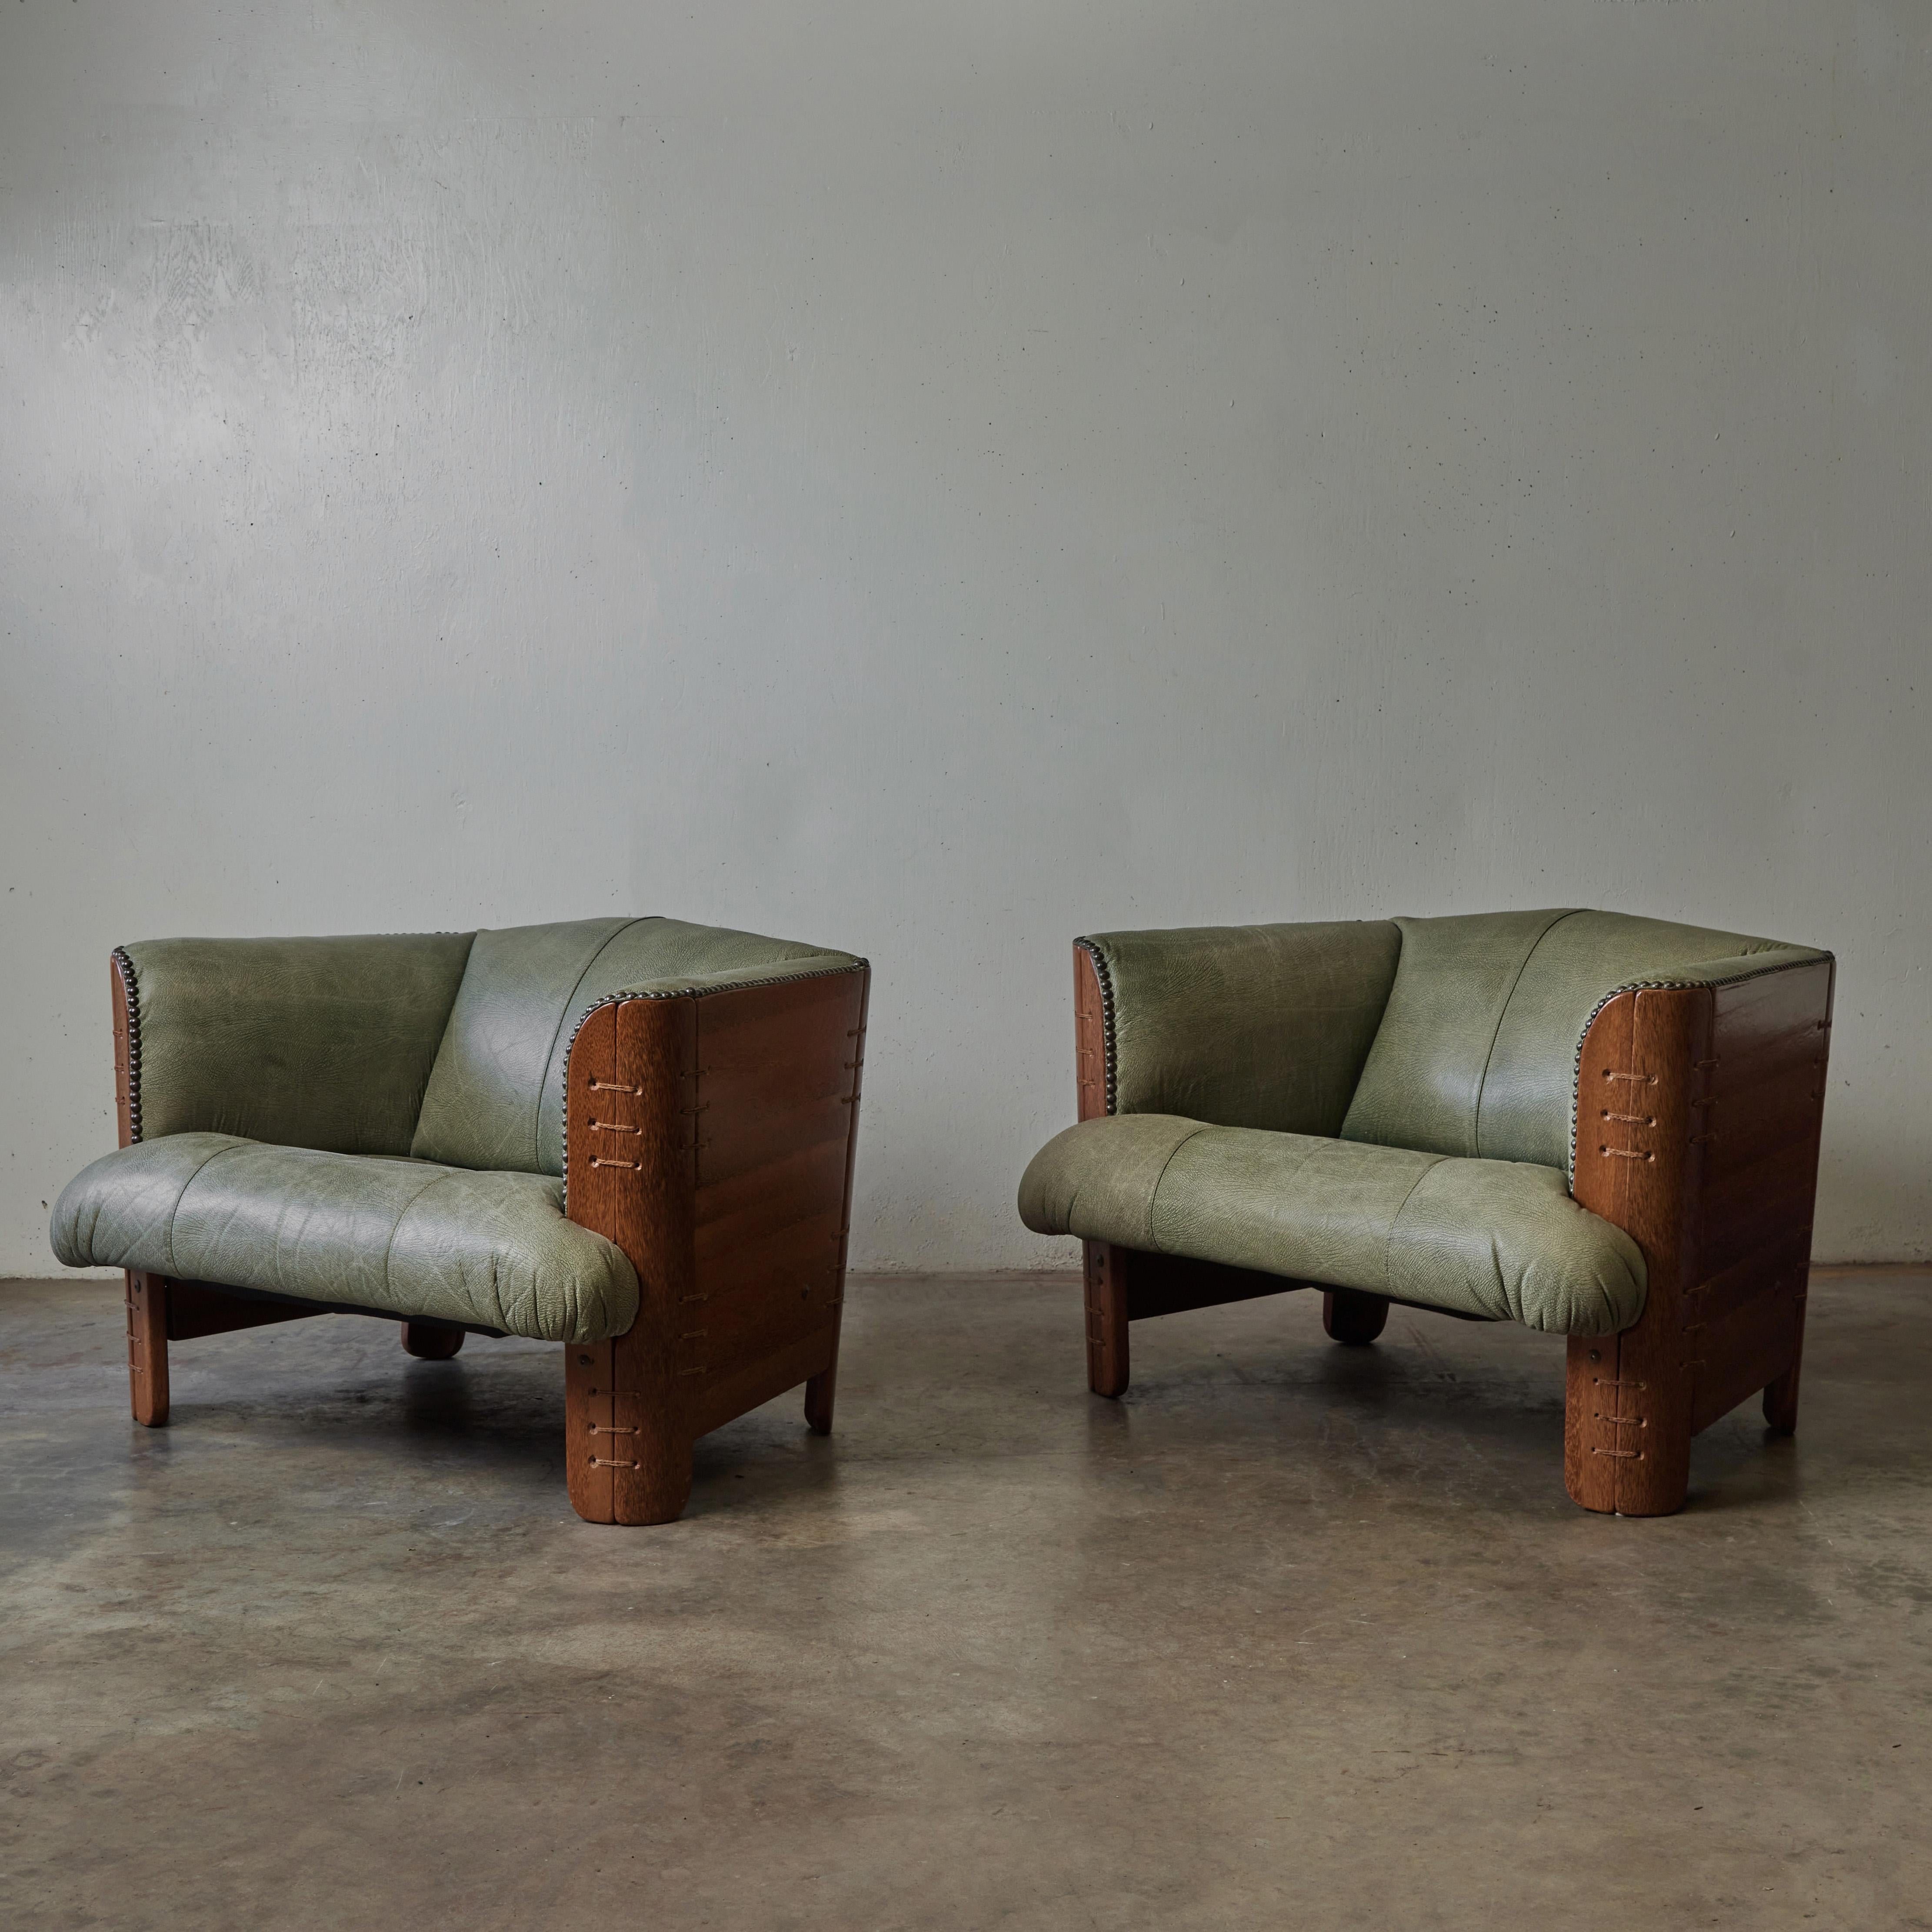 American Pair of Mid-Century Palmwood Chairs with Original Green Leather Upholstery